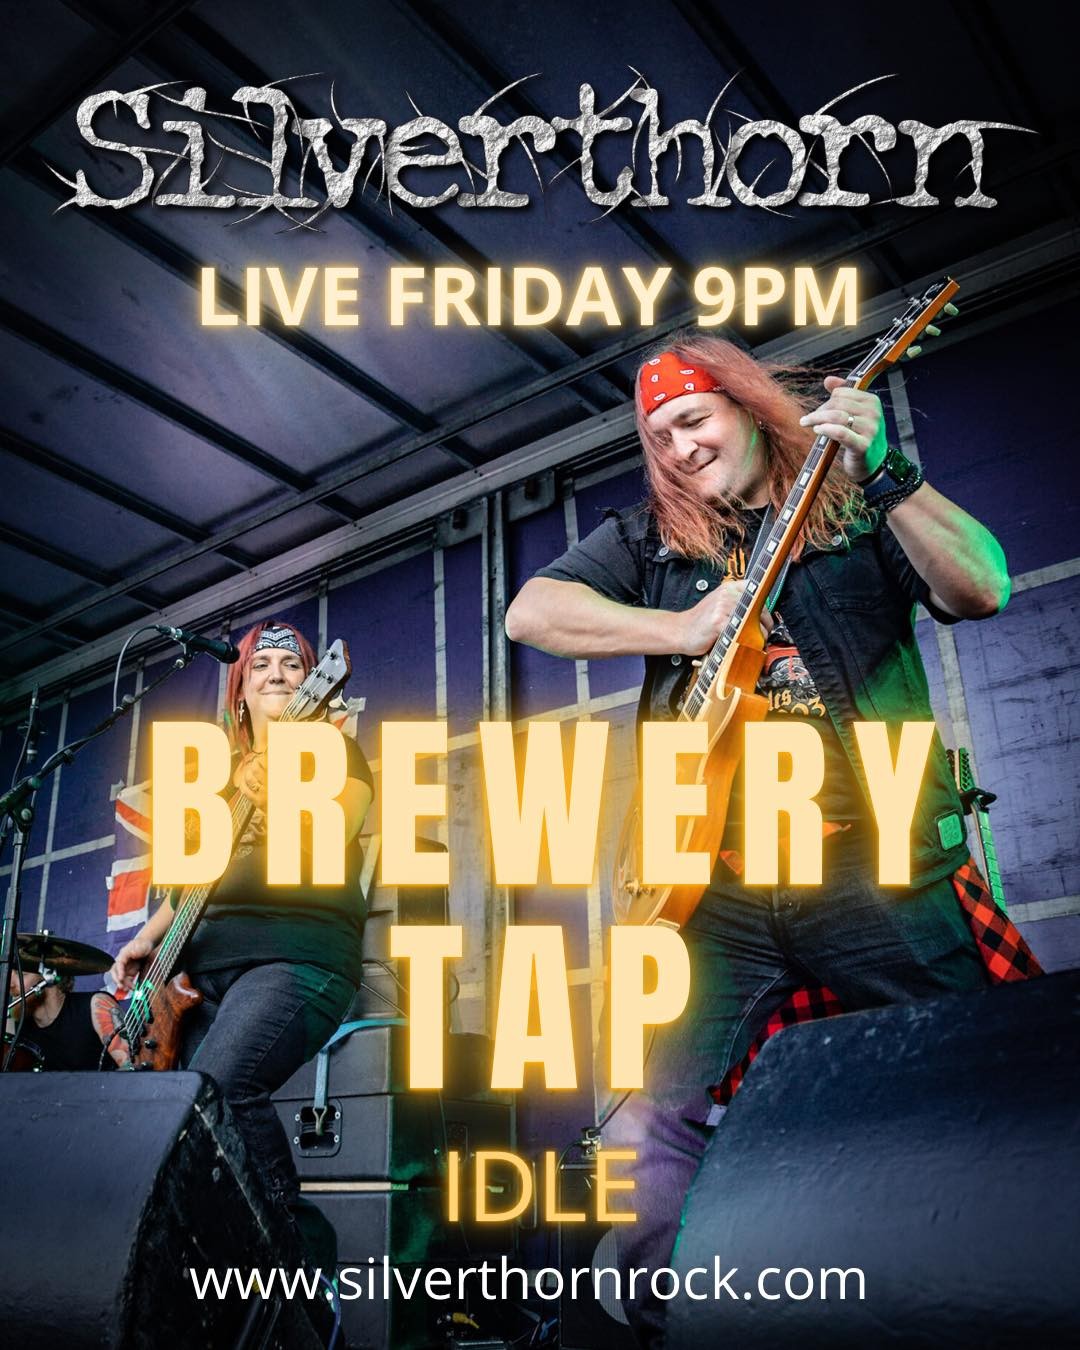 Tonight we are back at The Brewery Tap!  Can’t wait to see you all down there!

#rock #coverband #silverthorn #rocknroll #livemusic #livemusicisbetter #silverthornrock #livemusicislife #rockmusic #LiveMusicIsBack #rockandroll #stadiumrock